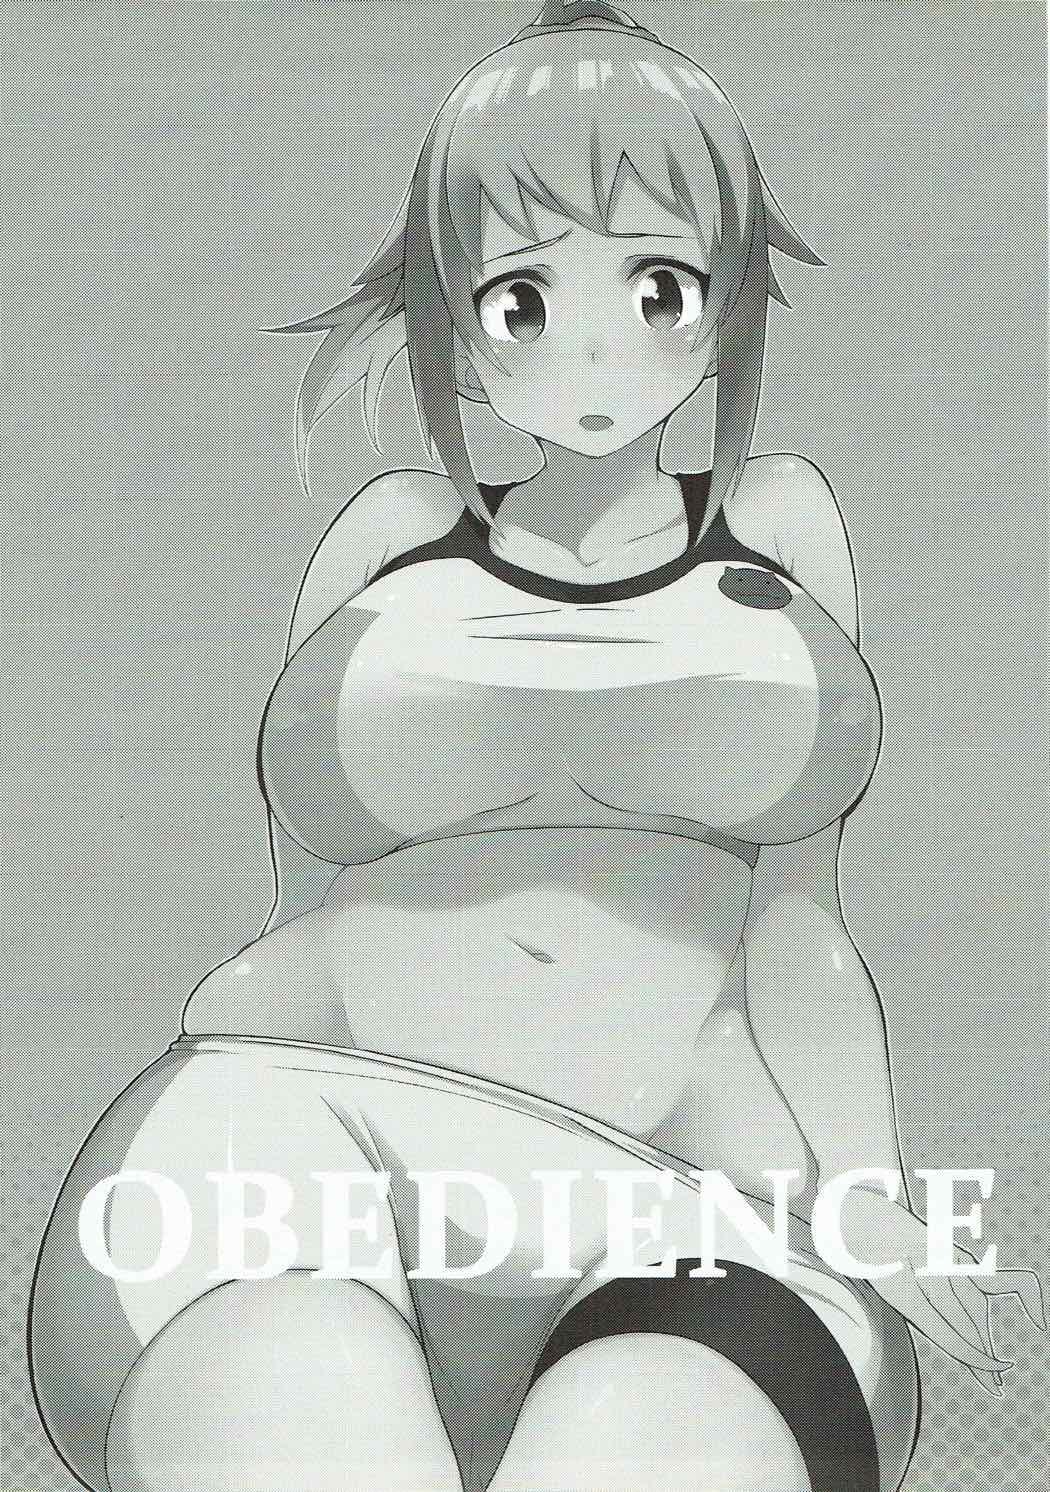 Rub Obedience - Gundam build fighters try Camwhore - Page 4